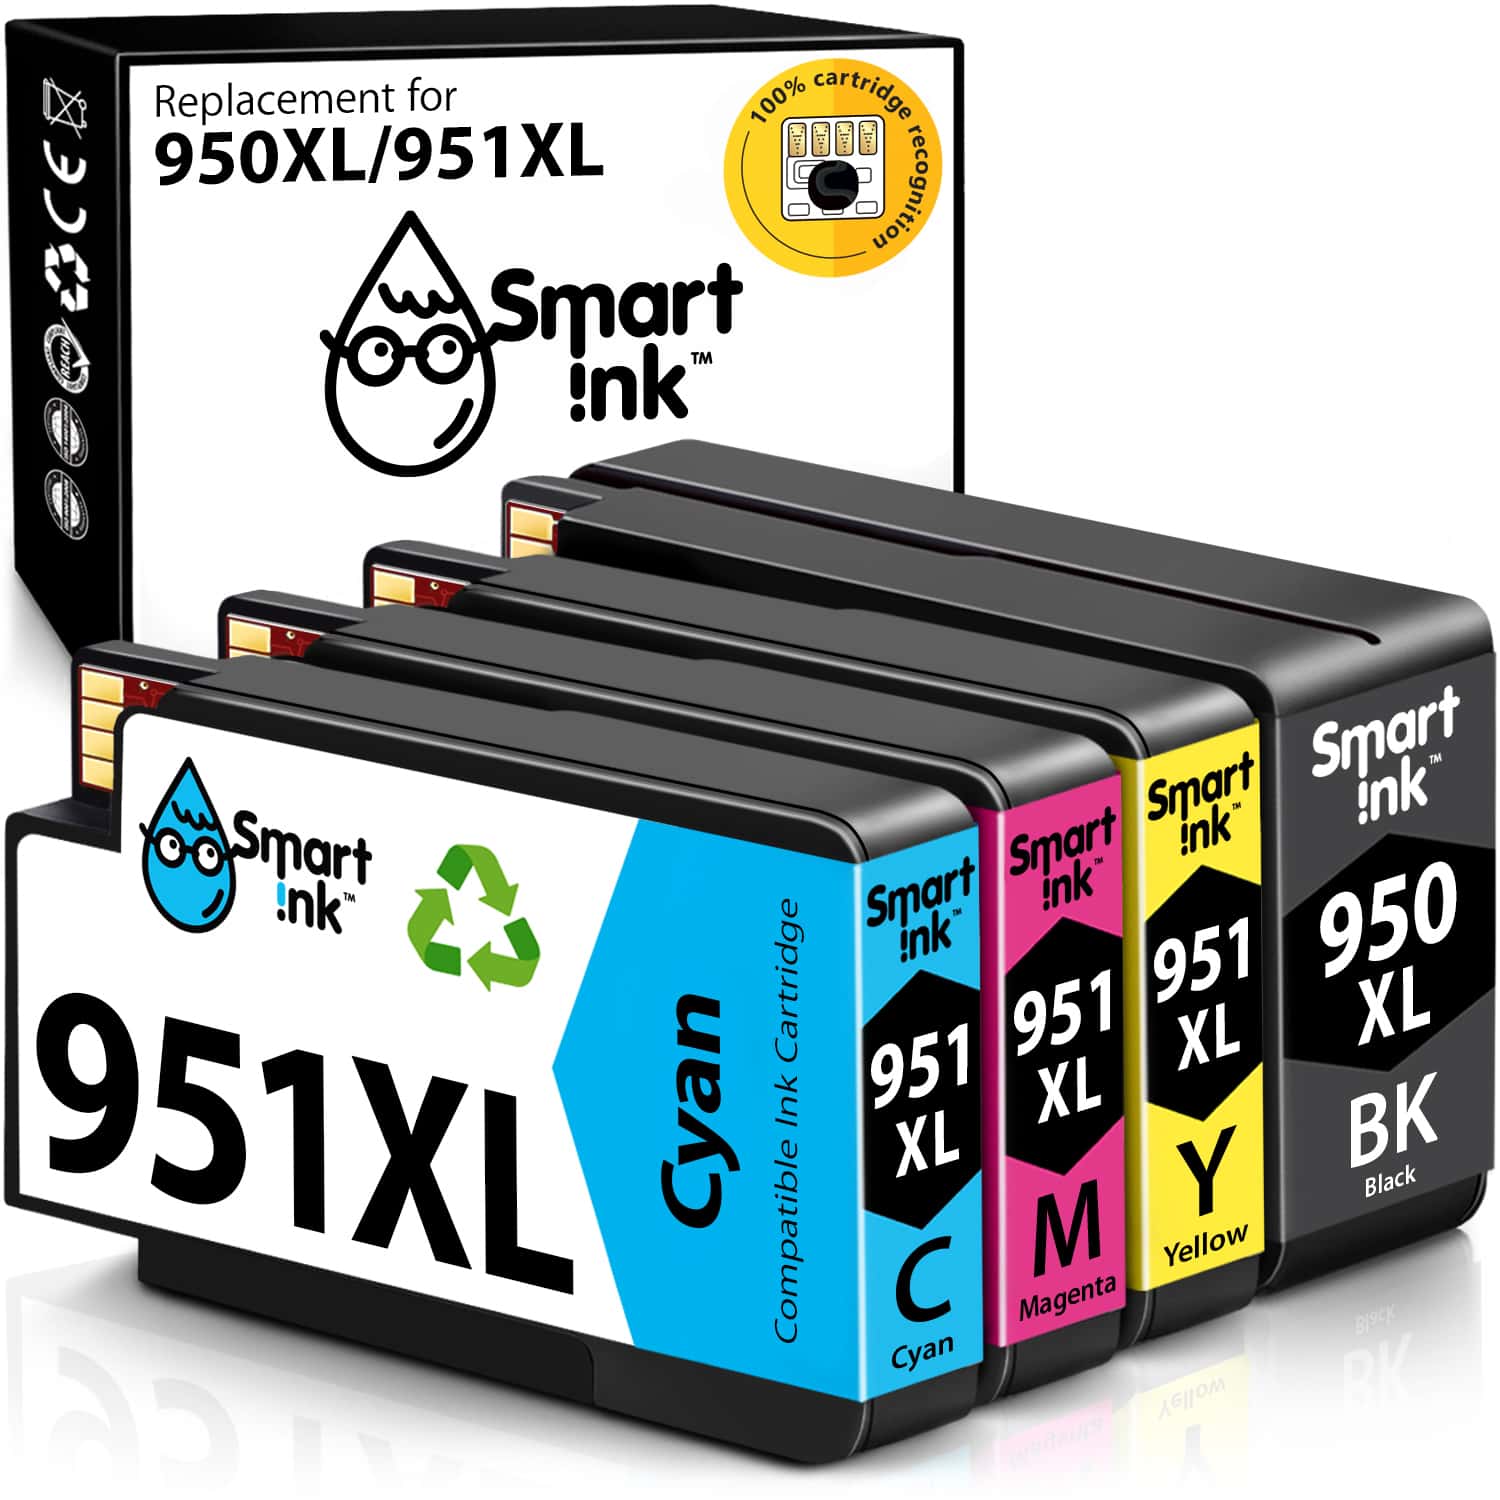 HP 950, 951 XL (4 pack) Ink Cartridge Replacement - Buy Printer Cartridges USA at the best price Smart Ink